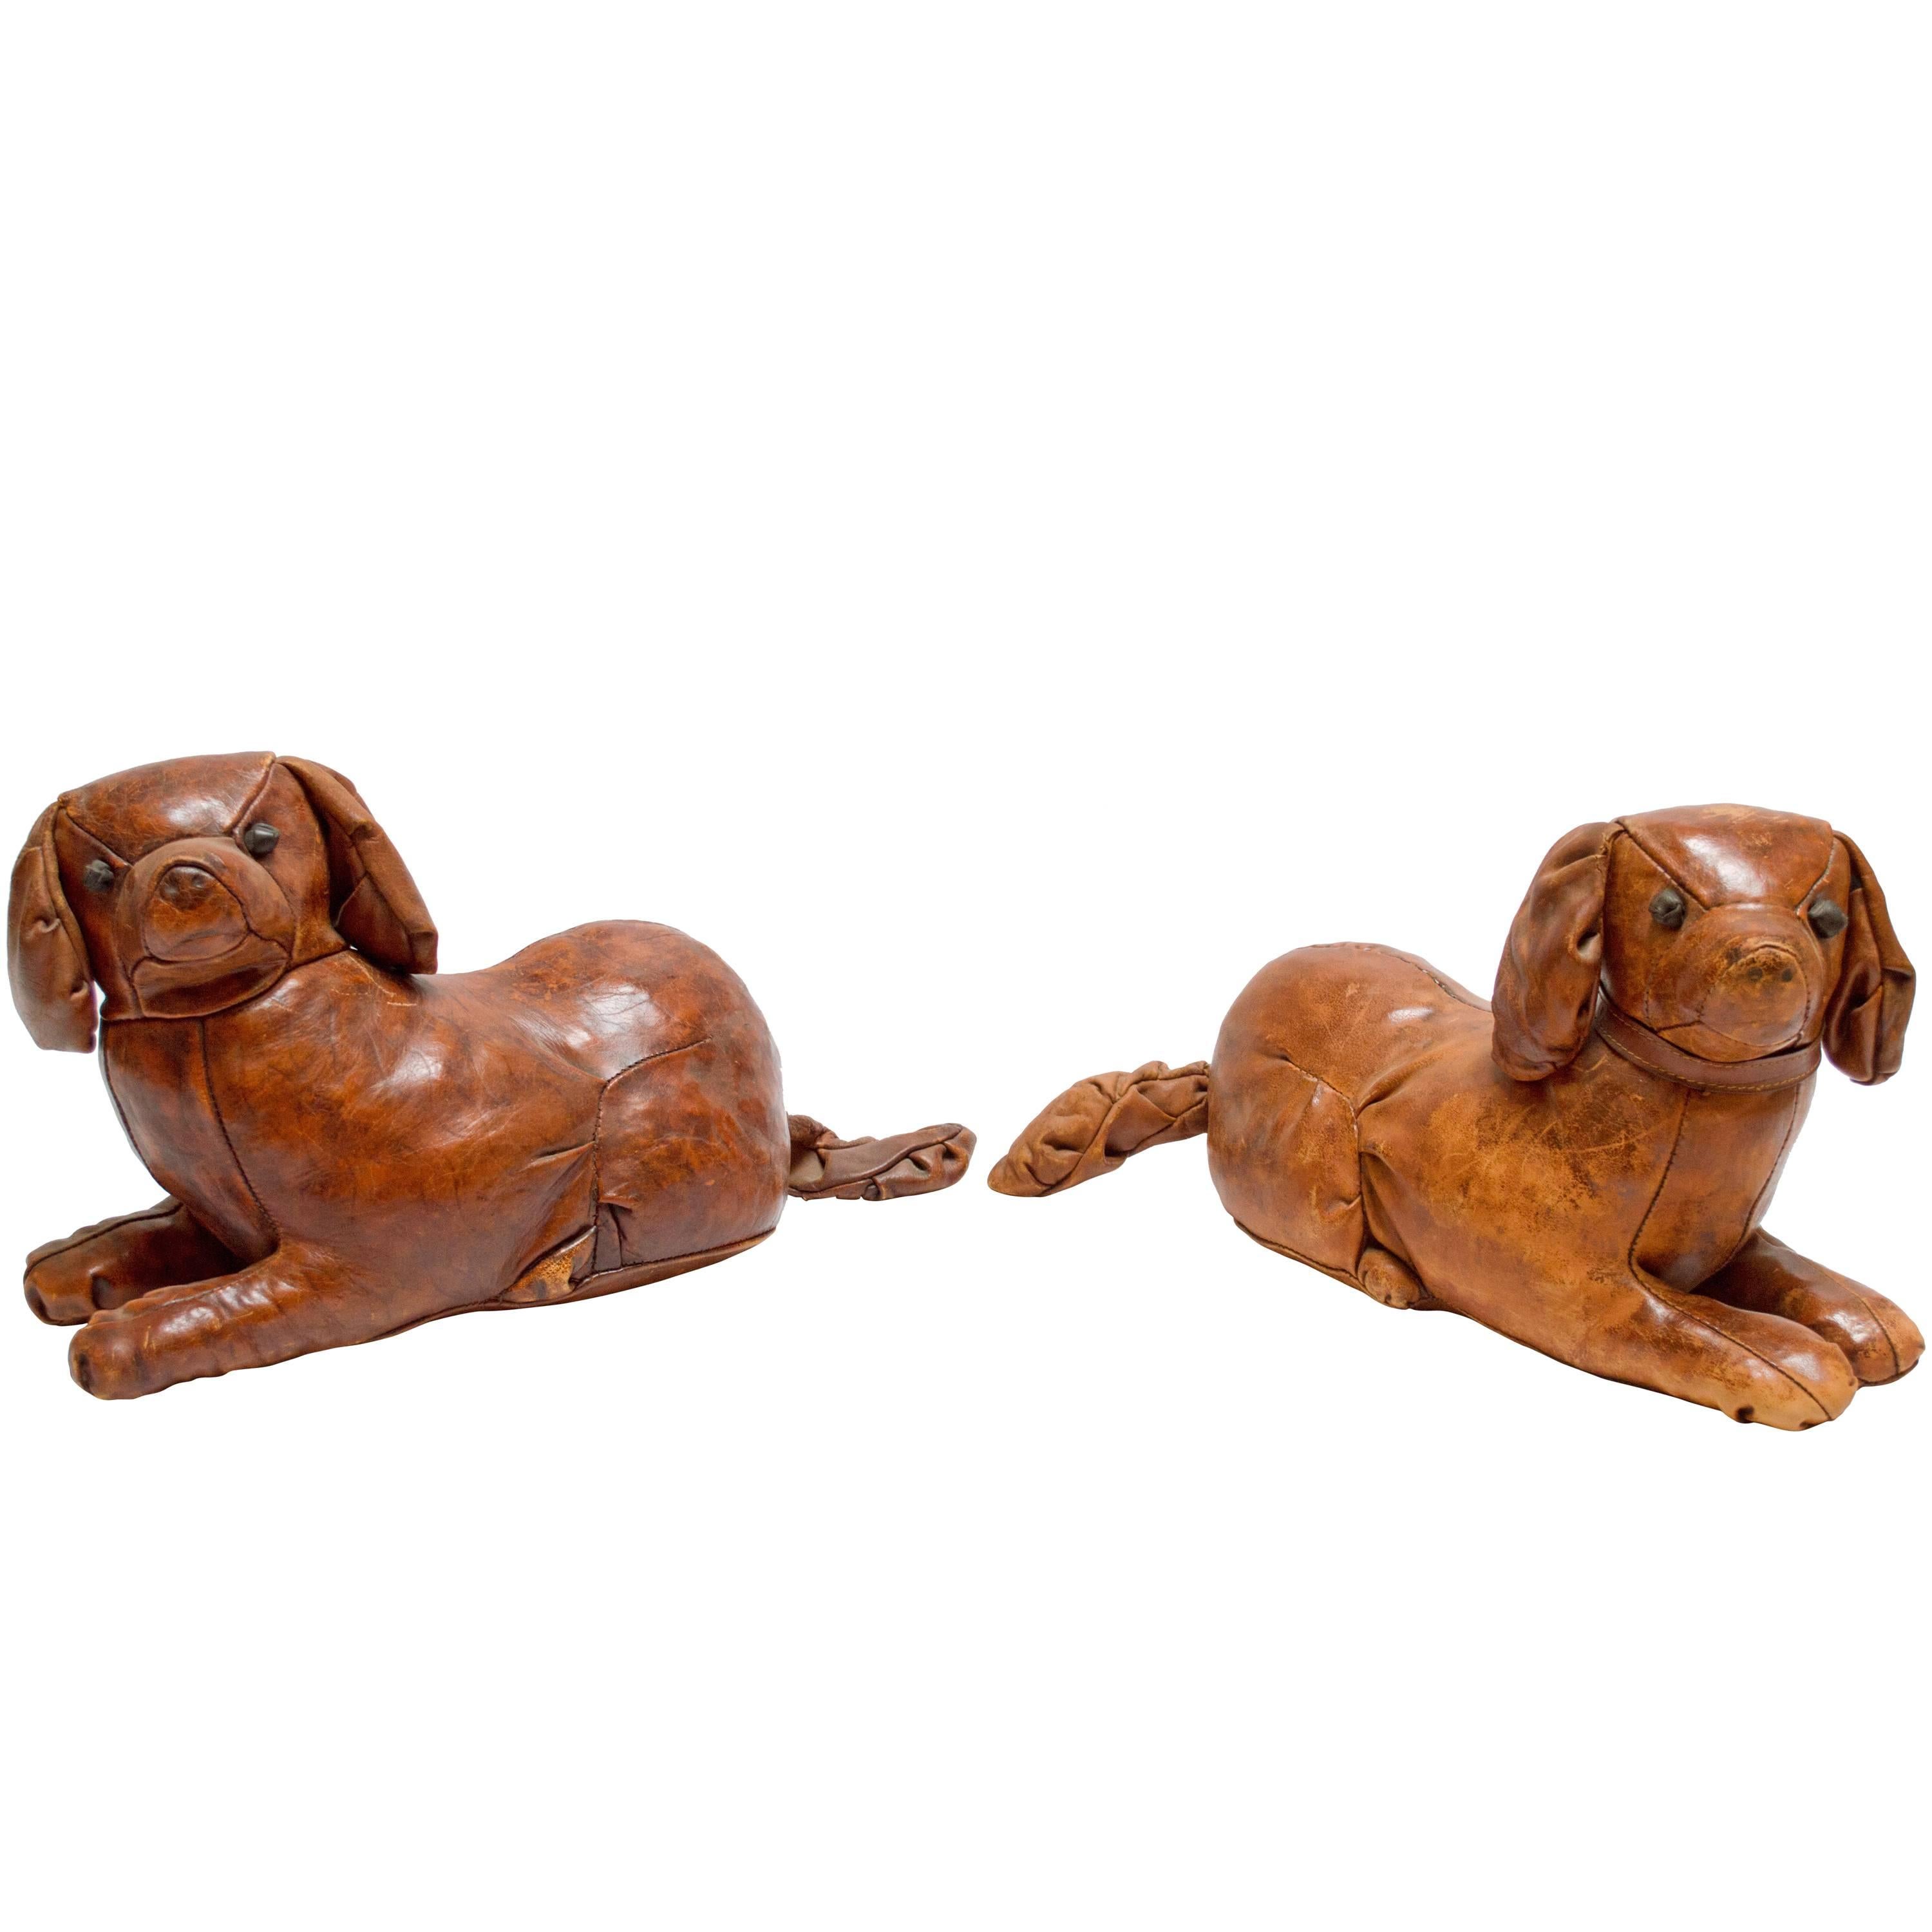 Pair of Leather King Charles Spaniels by Omersa for Abercrombie & Fitch, 1950 For Sale